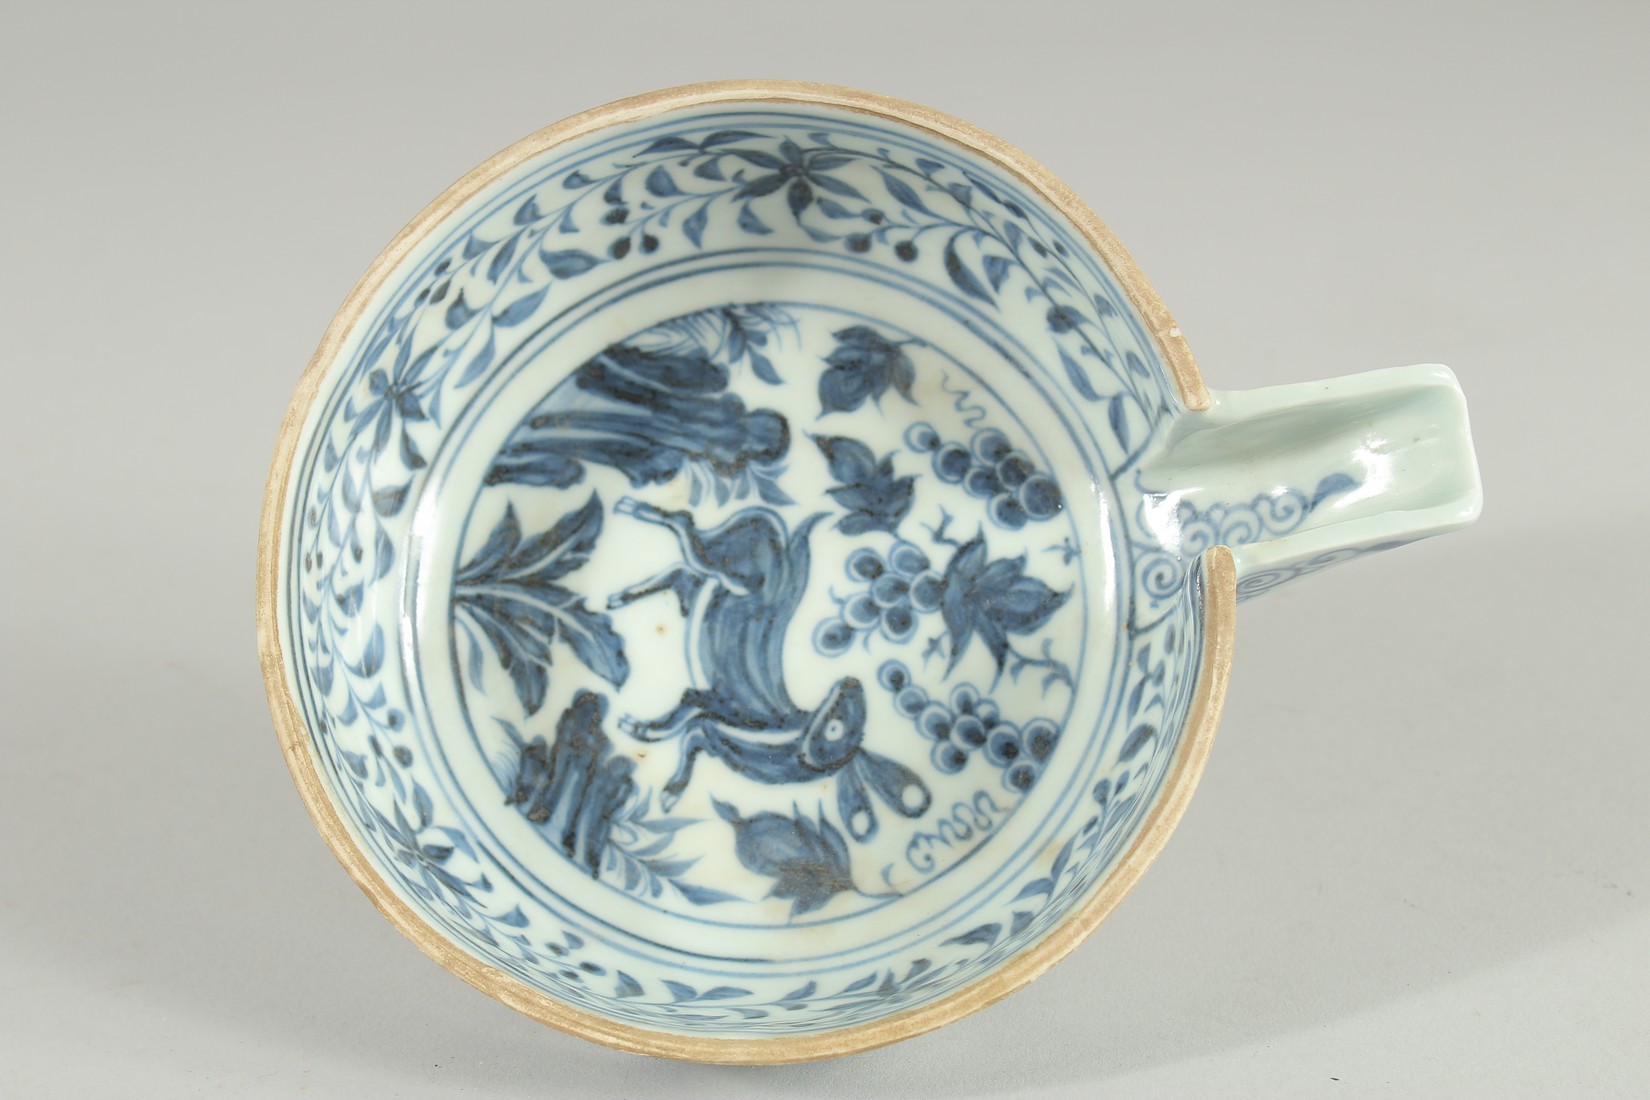 A CHINESE BLUE AND WHITE PORCELAIN OIL CUP, painted with a rabbit, 13cm diameter (excluding spout). - Image 3 of 4